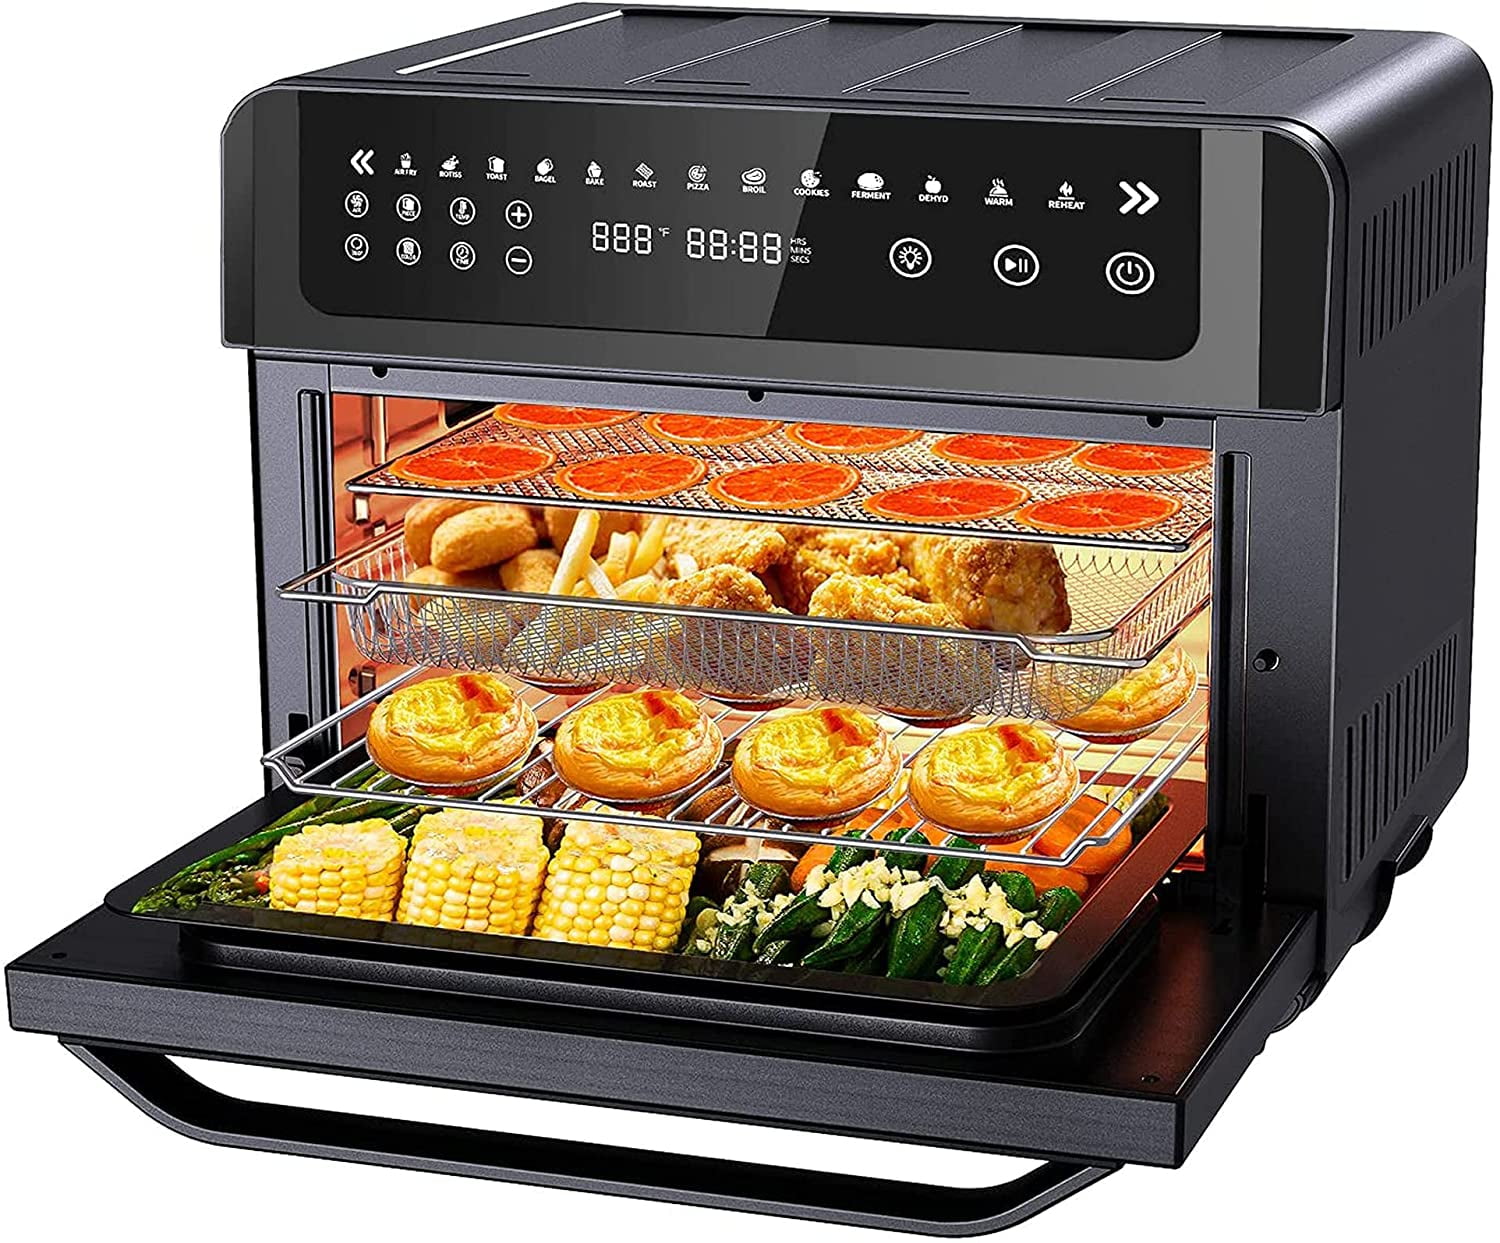 Gevi Air Fryer Toaster Oven Combo, Large Digital LED Screen Convection